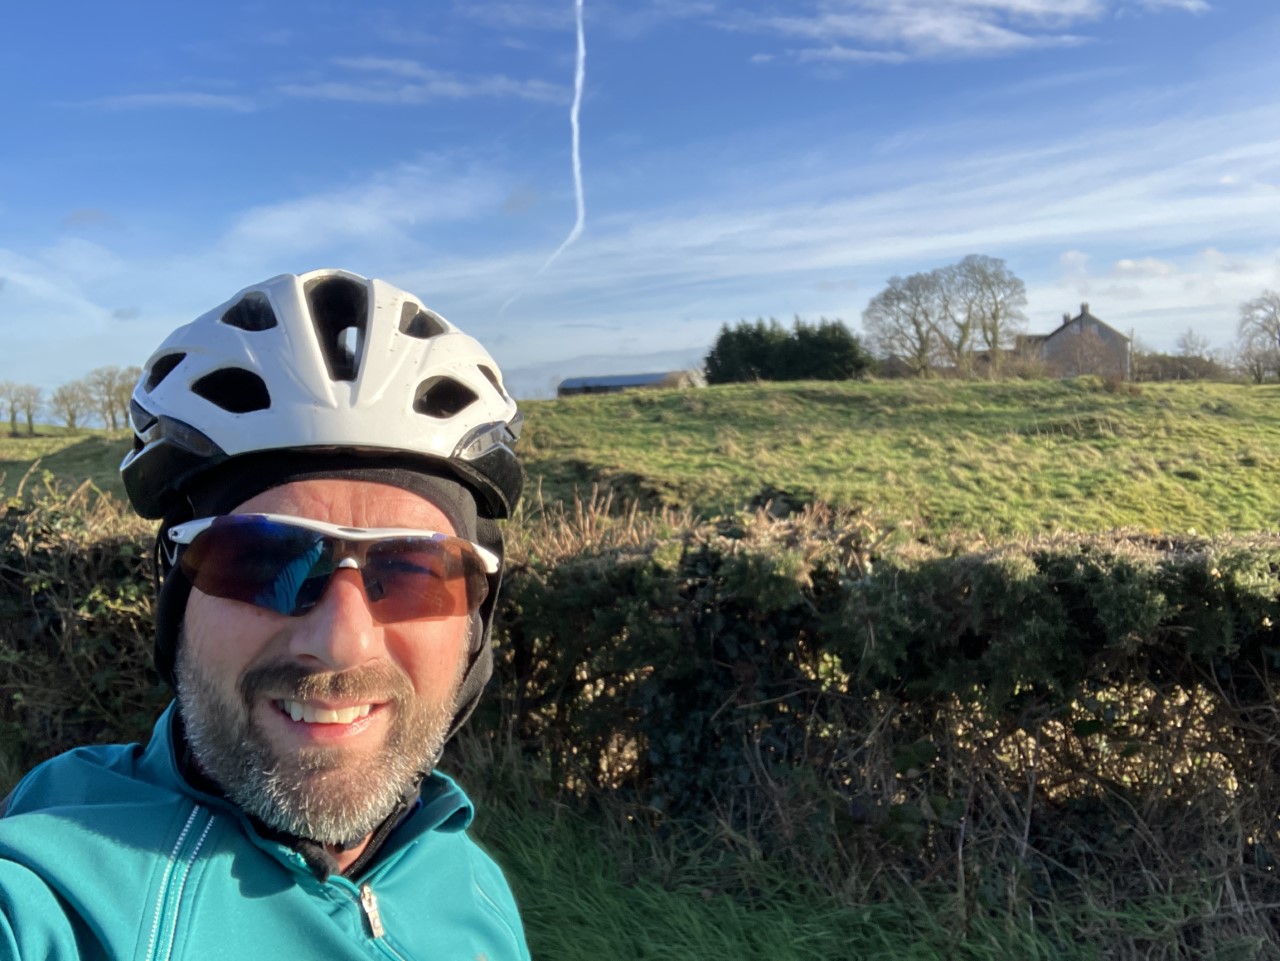 Solo Ride February 14th - 28 Day Active Challenge